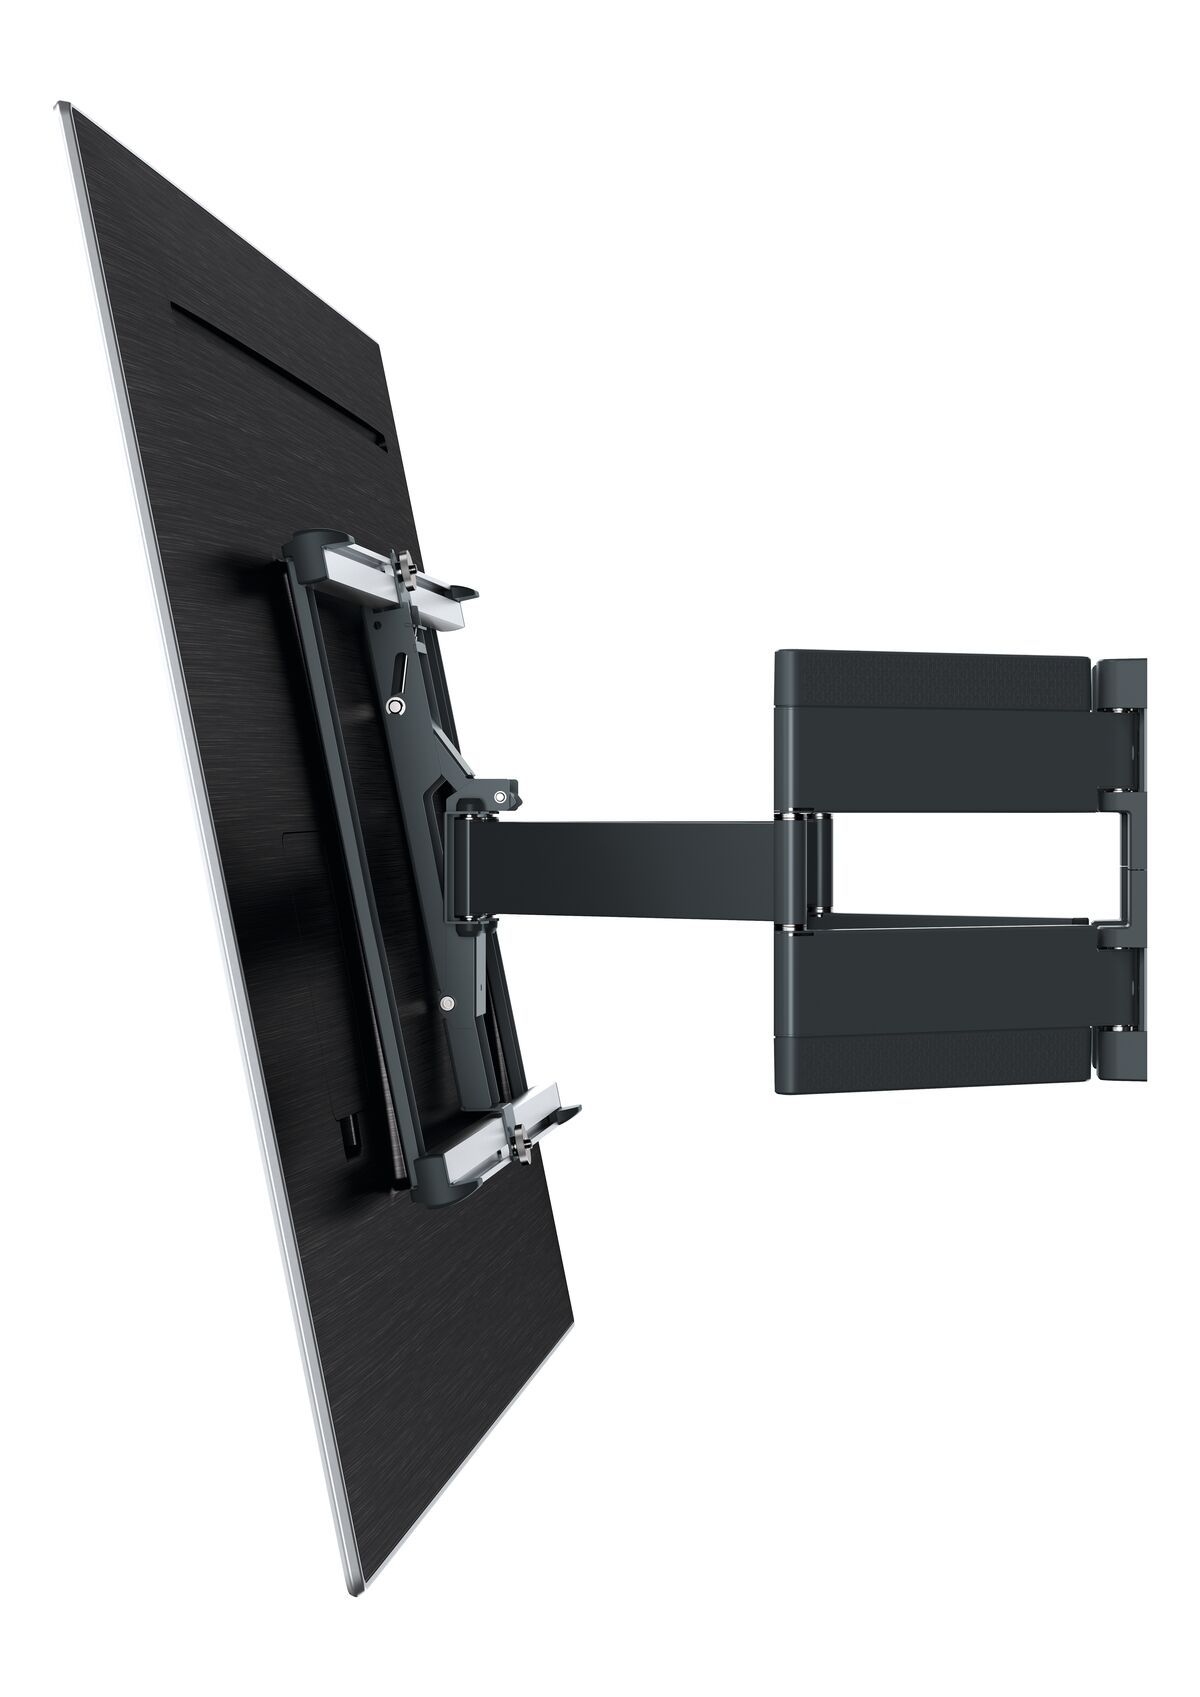 Vogel's THIN 550 ExtraThin Full-Motion TV Wall Mount - Suitable for 40 up to 100 inch TVs - Forward and turning motion (up to 120°) - Tilt up to 20° - Application